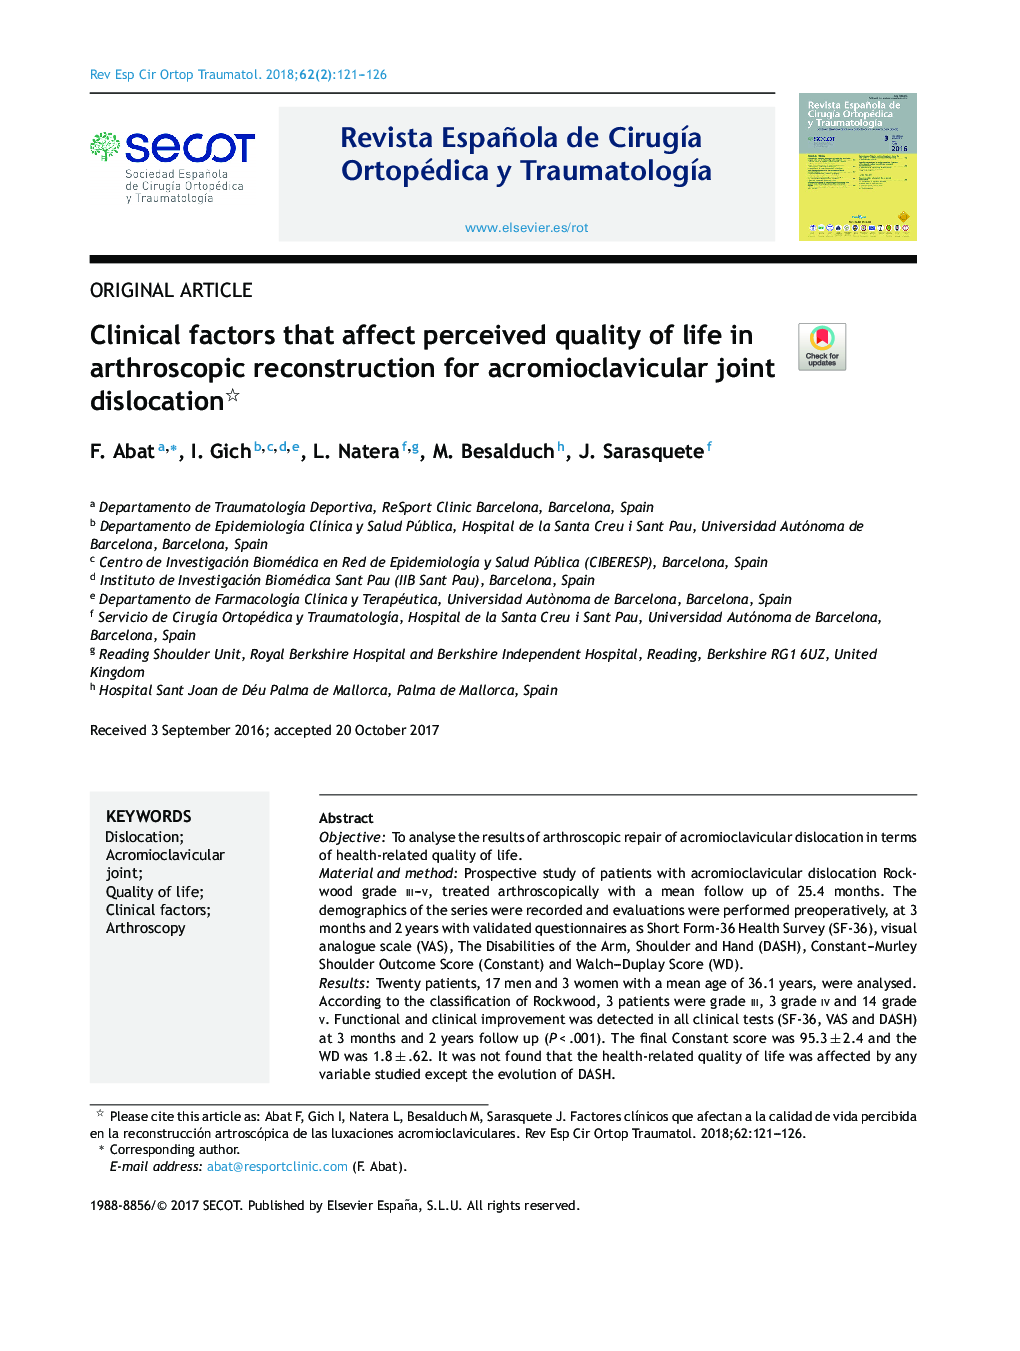 Clinical factors that affect perceived quality of life in arthroscopic reconstruction for acromioclavicular joint dislocation